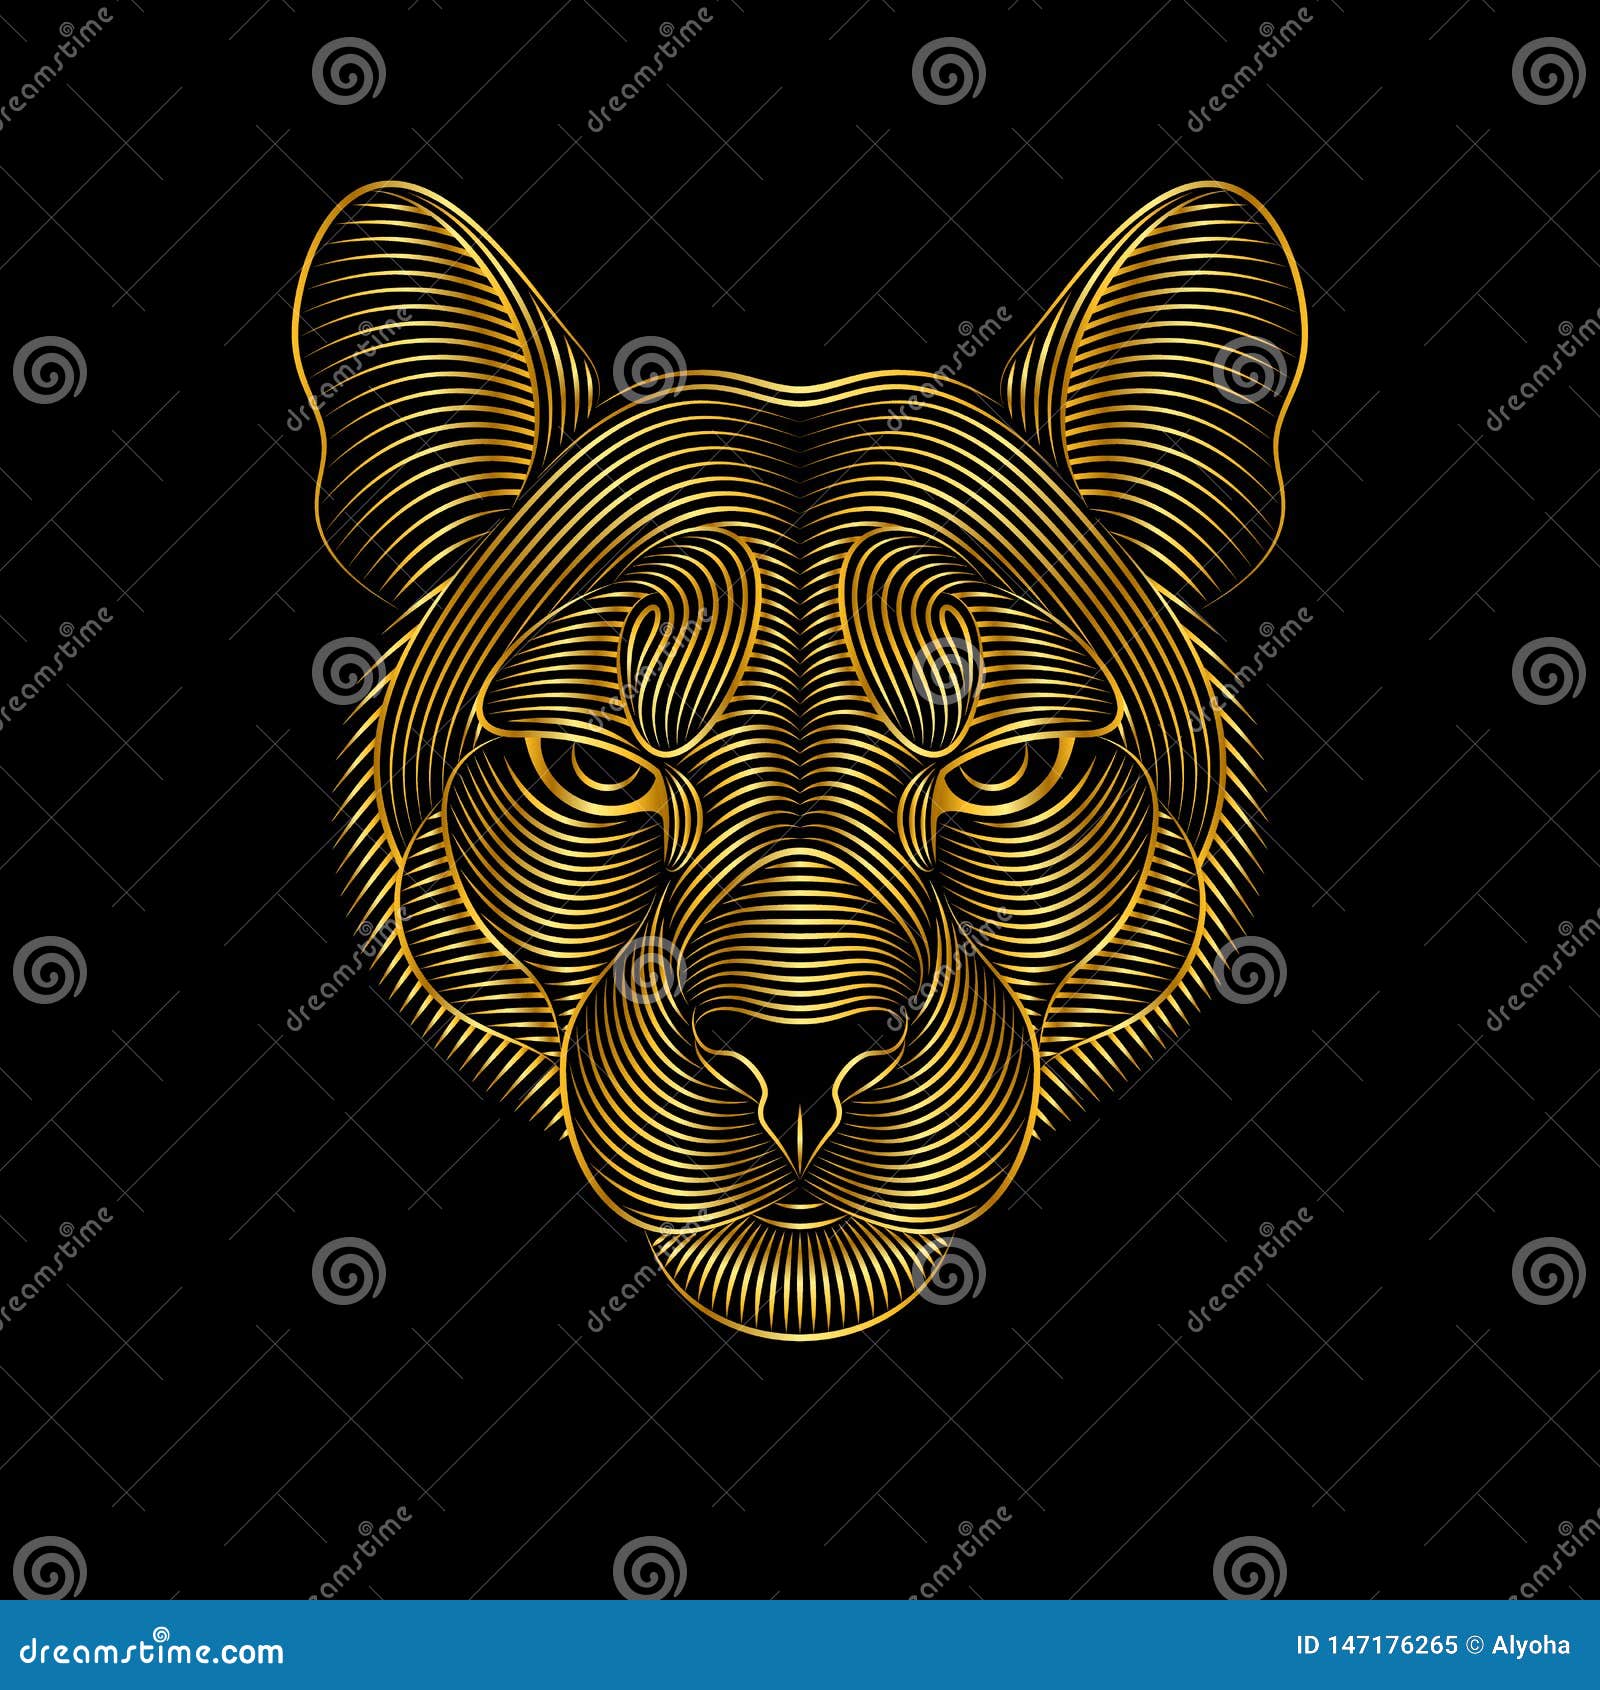 Engraving Of Stylized Golden Puma On 